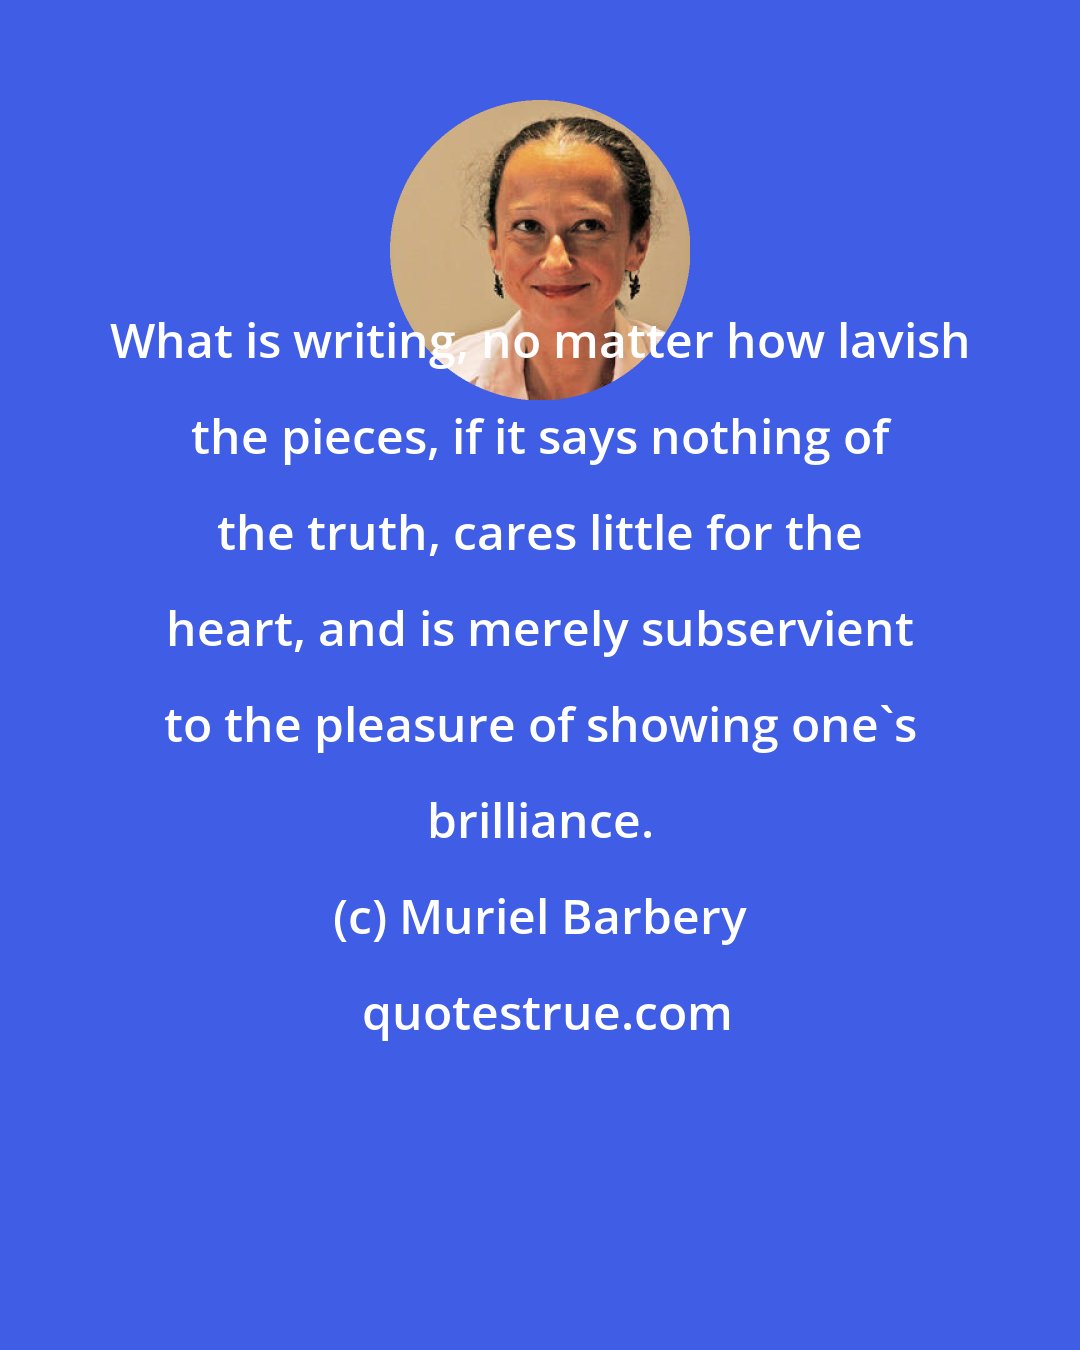 Muriel Barbery: What is writing, no matter how lavish the pieces, if it says nothing of the truth, cares little for the heart, and is merely subservient to the pleasure of showing one's brilliance.